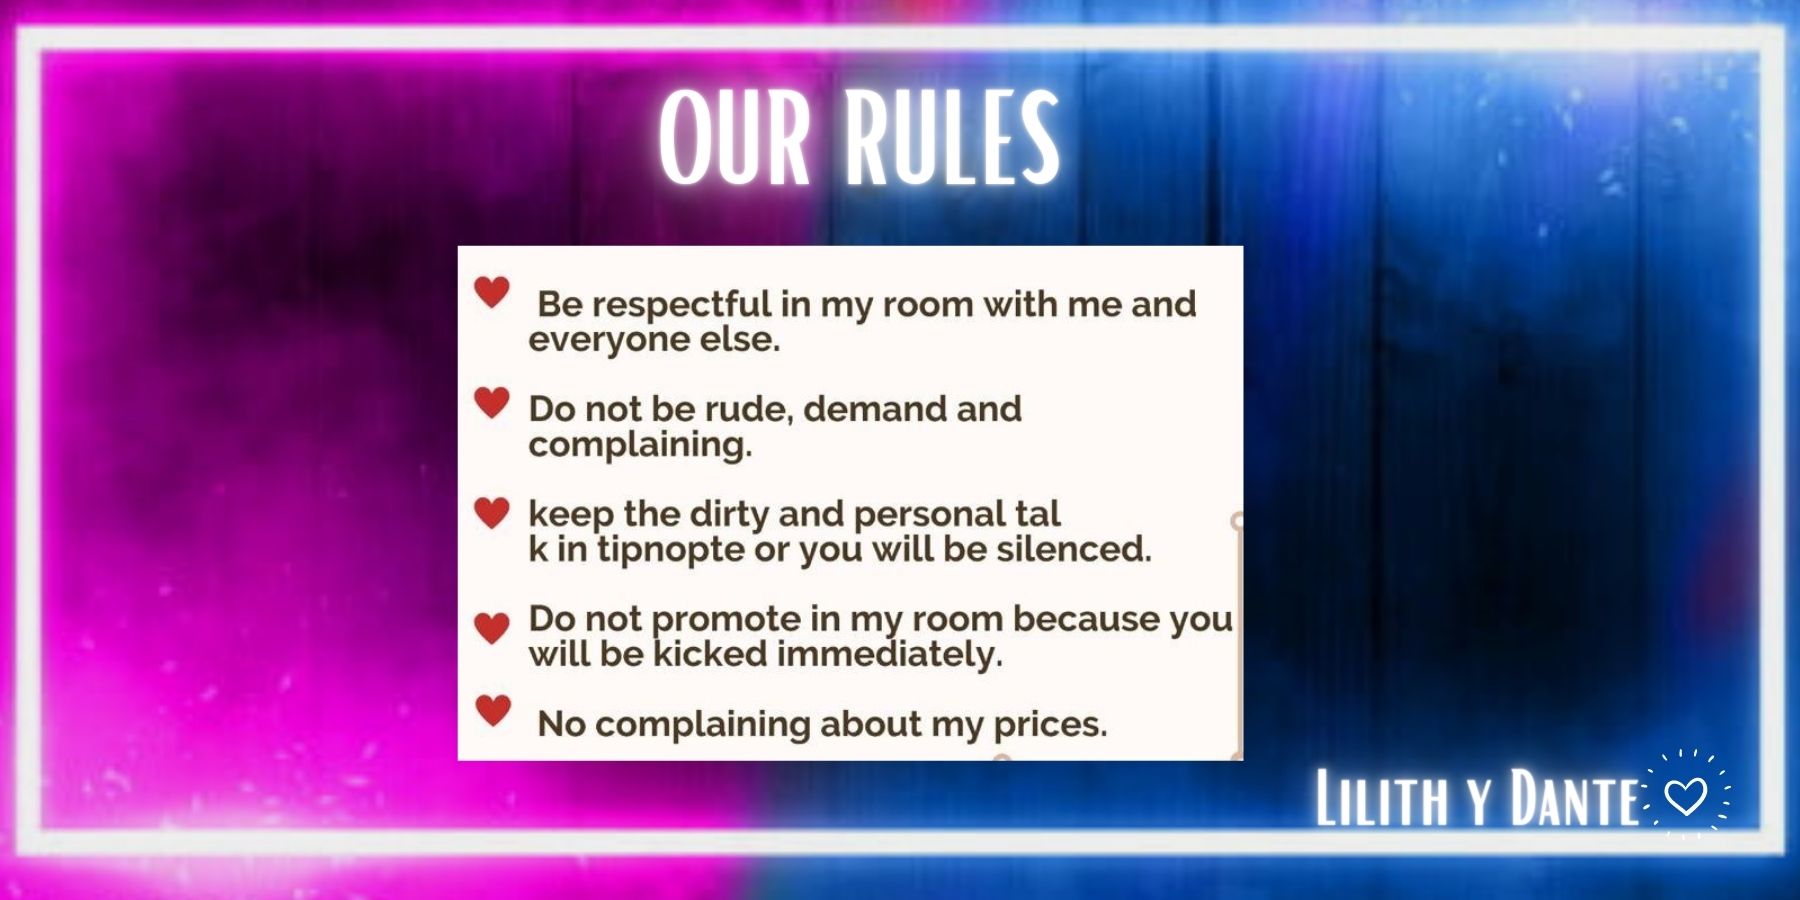 lilithydante OUR RULES image: 1